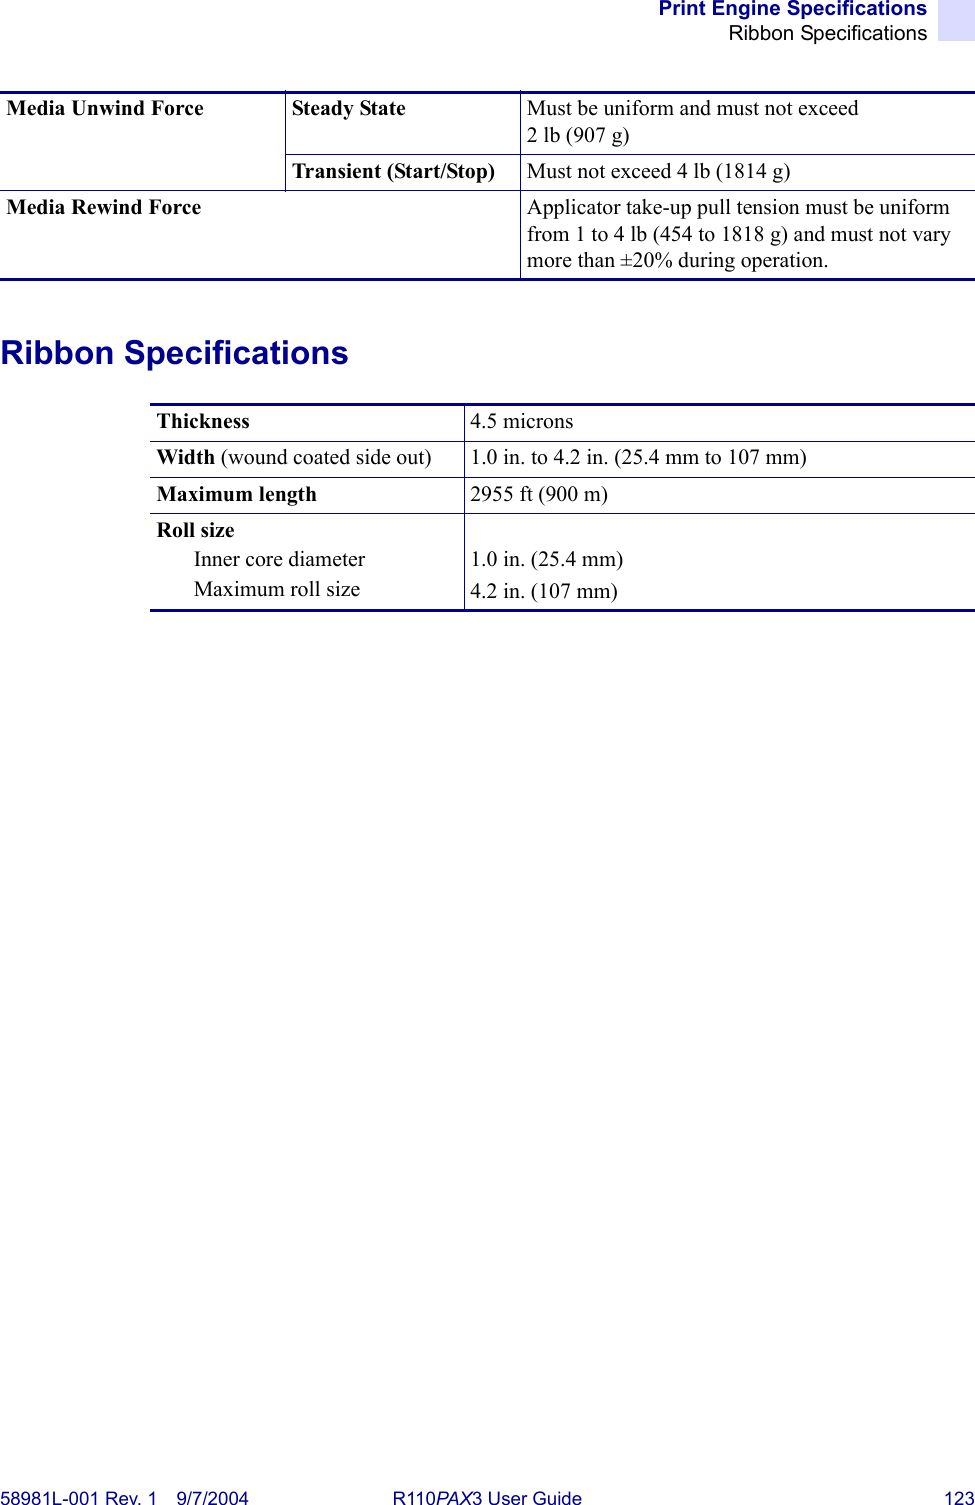 Print Engine SpecificationsRibbon Specifications58981L-001 Rev. 1 9/7/2004 R110PAX3 User Guide 123Ribbon SpecificationsMedia Unwind Force Steady State Must be uniform and must not exceed 2lb(907g)Transient (Start/Stop) Must not exceed 4 lb (1814 g)Media Rewind Force Applicator take-up pull tension must be uniform from 1 to 4 lb (454 to 1818 g) and must not vary more than ±20% during operation.Thickness 4.5 micronsWidth (wound coated side out) 1.0 in. to 4.2 in. (25.4 mm to 107 mm)Maximum length 2955 ft (900 m)Roll sizeInner core diameterMaximum roll size1.0 in. (25.4 mm) 4.2 in. (107 mm) 